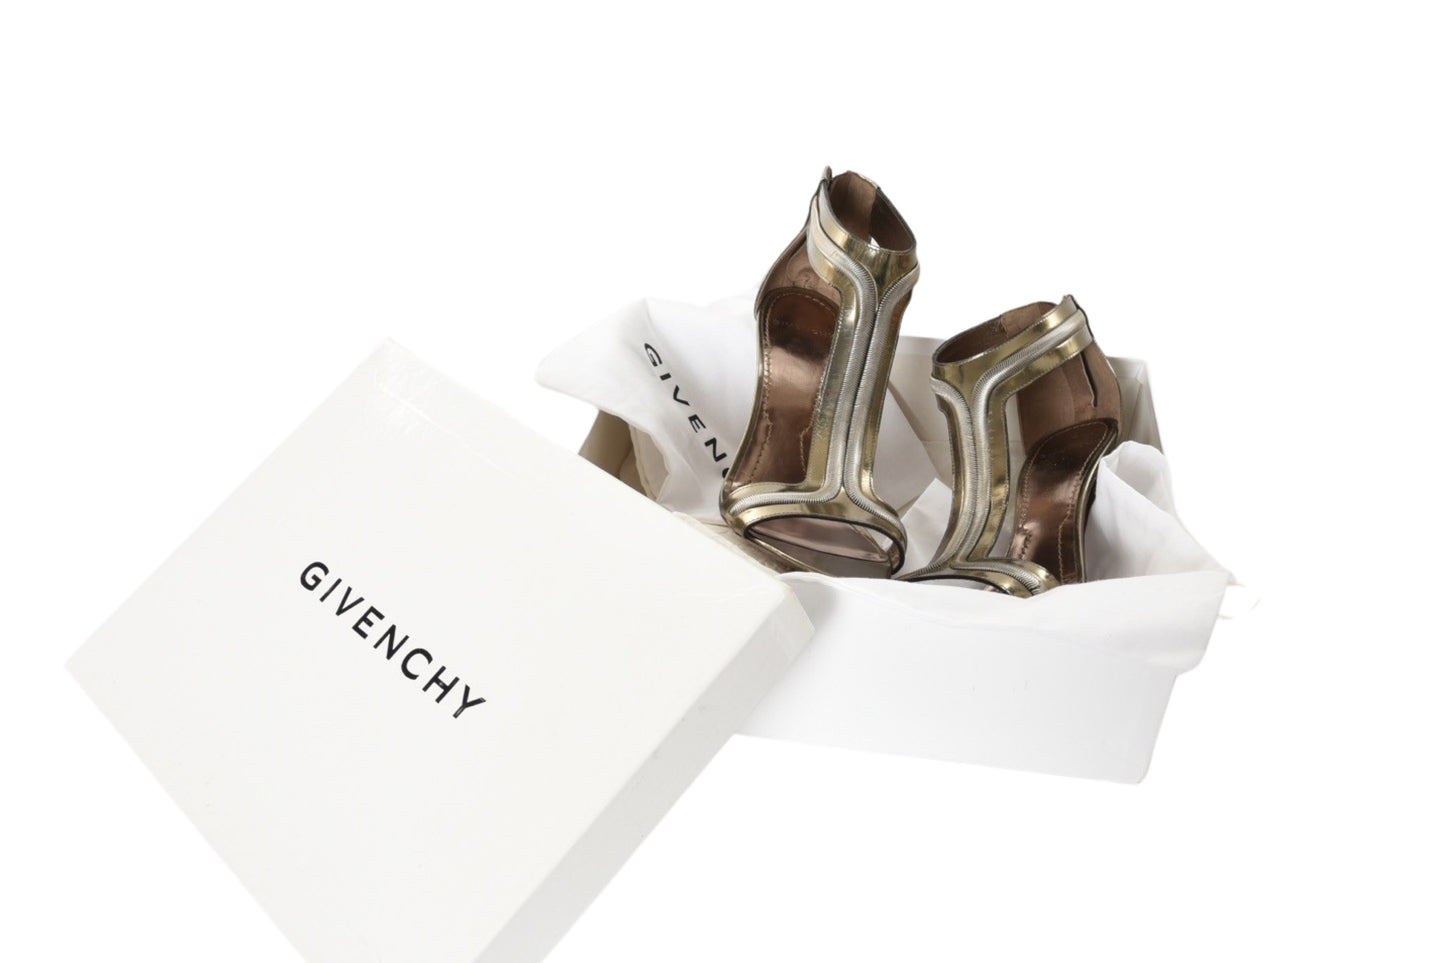 Givenchy Patent Leather T-Strap Sandals Heels Metallic Size 37